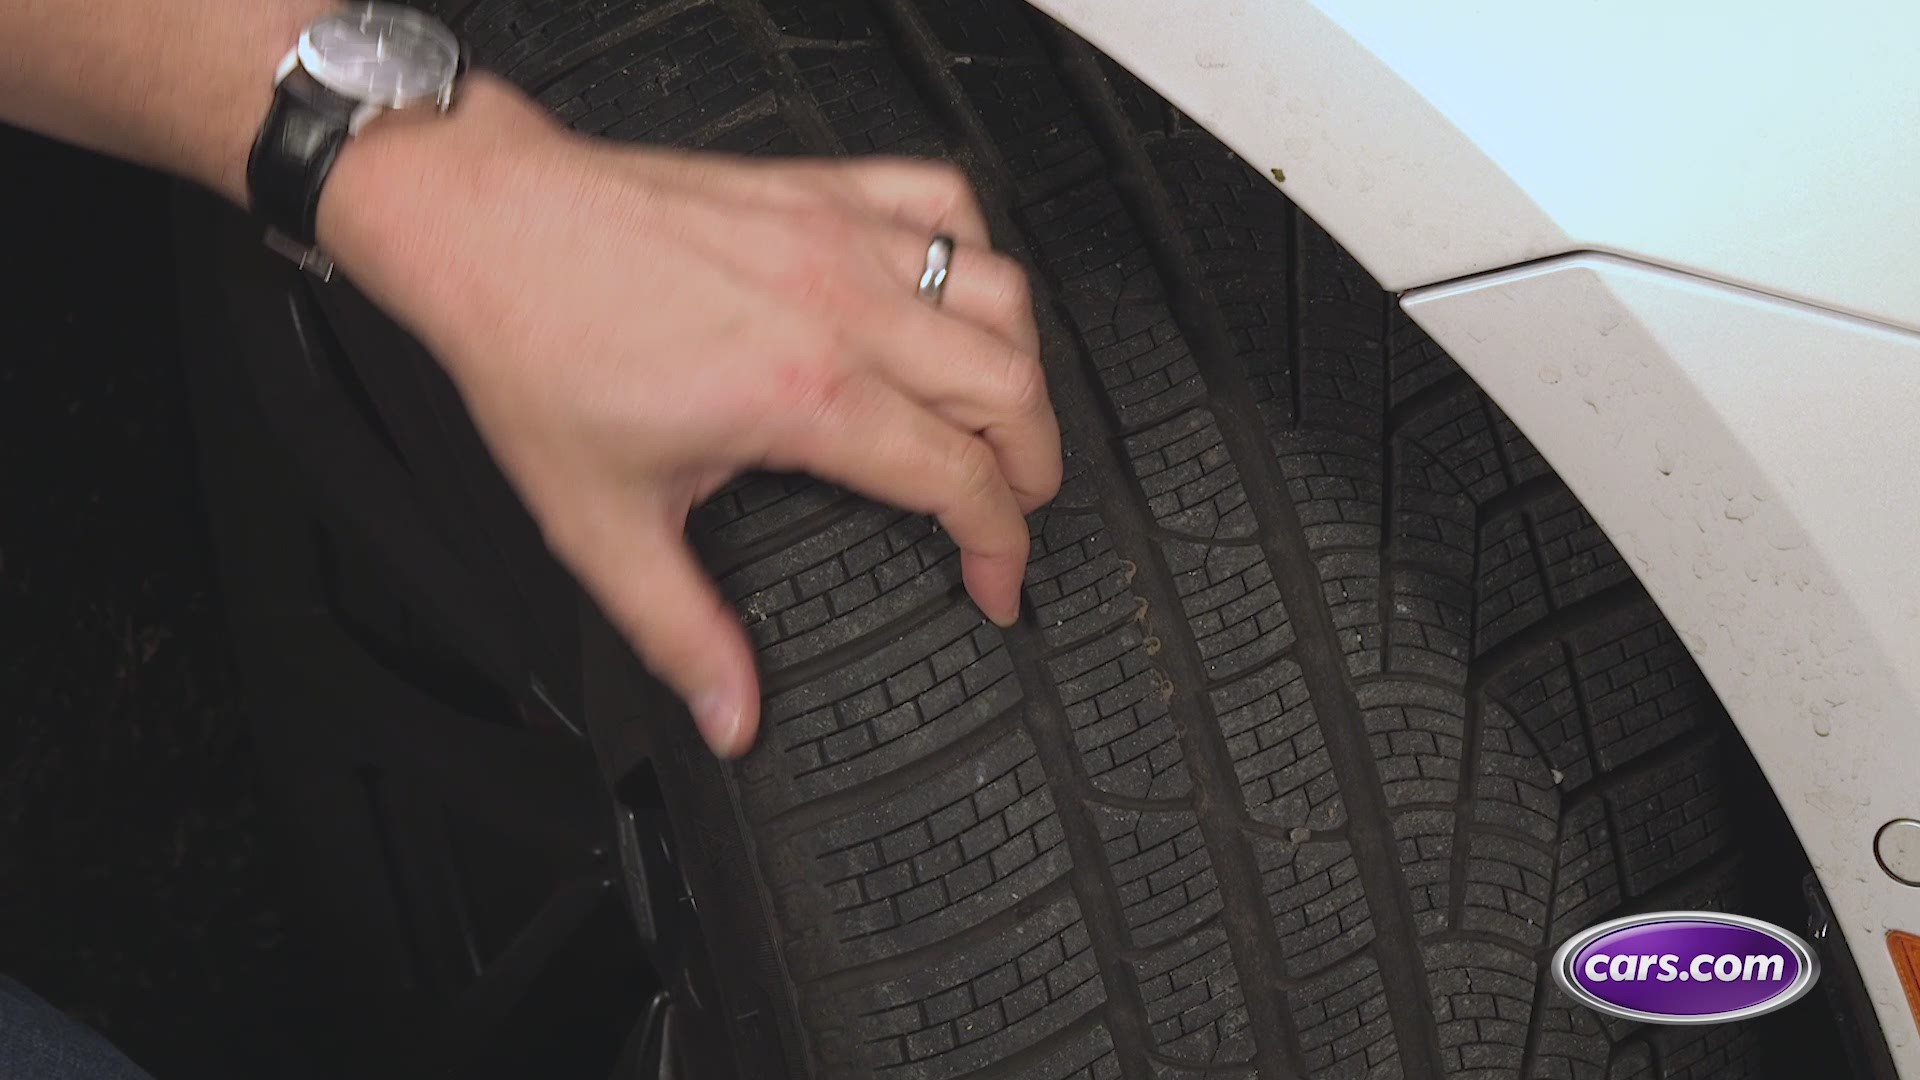 Joe Wiesenfelder of Cars.com helps explains the differences between winter, summer and all-season tires, and why you might need them.